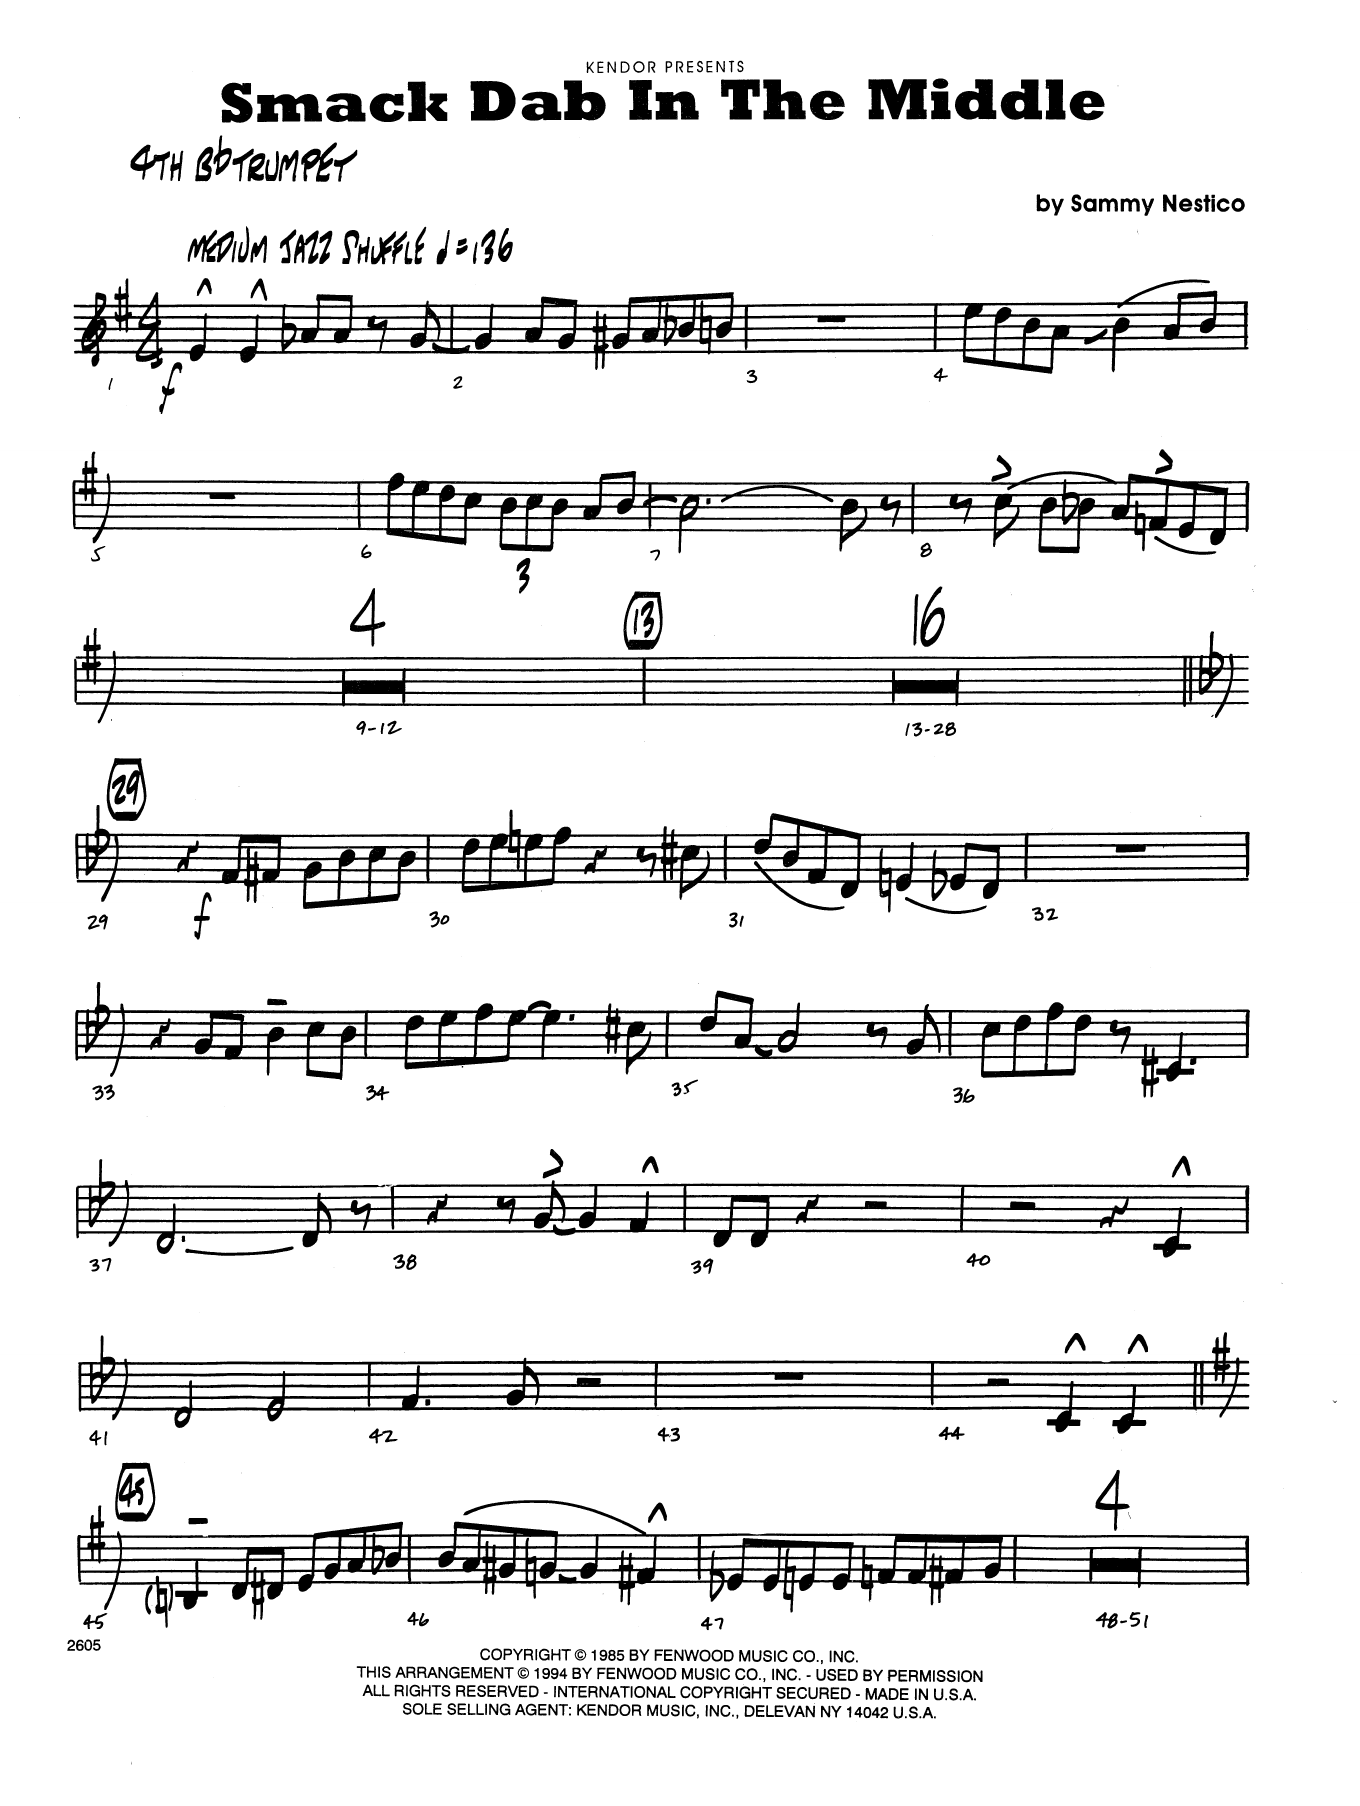 Download Sammy Nestico Smack Dab in the Middle - 4th Bb Trumpe Sheet Music